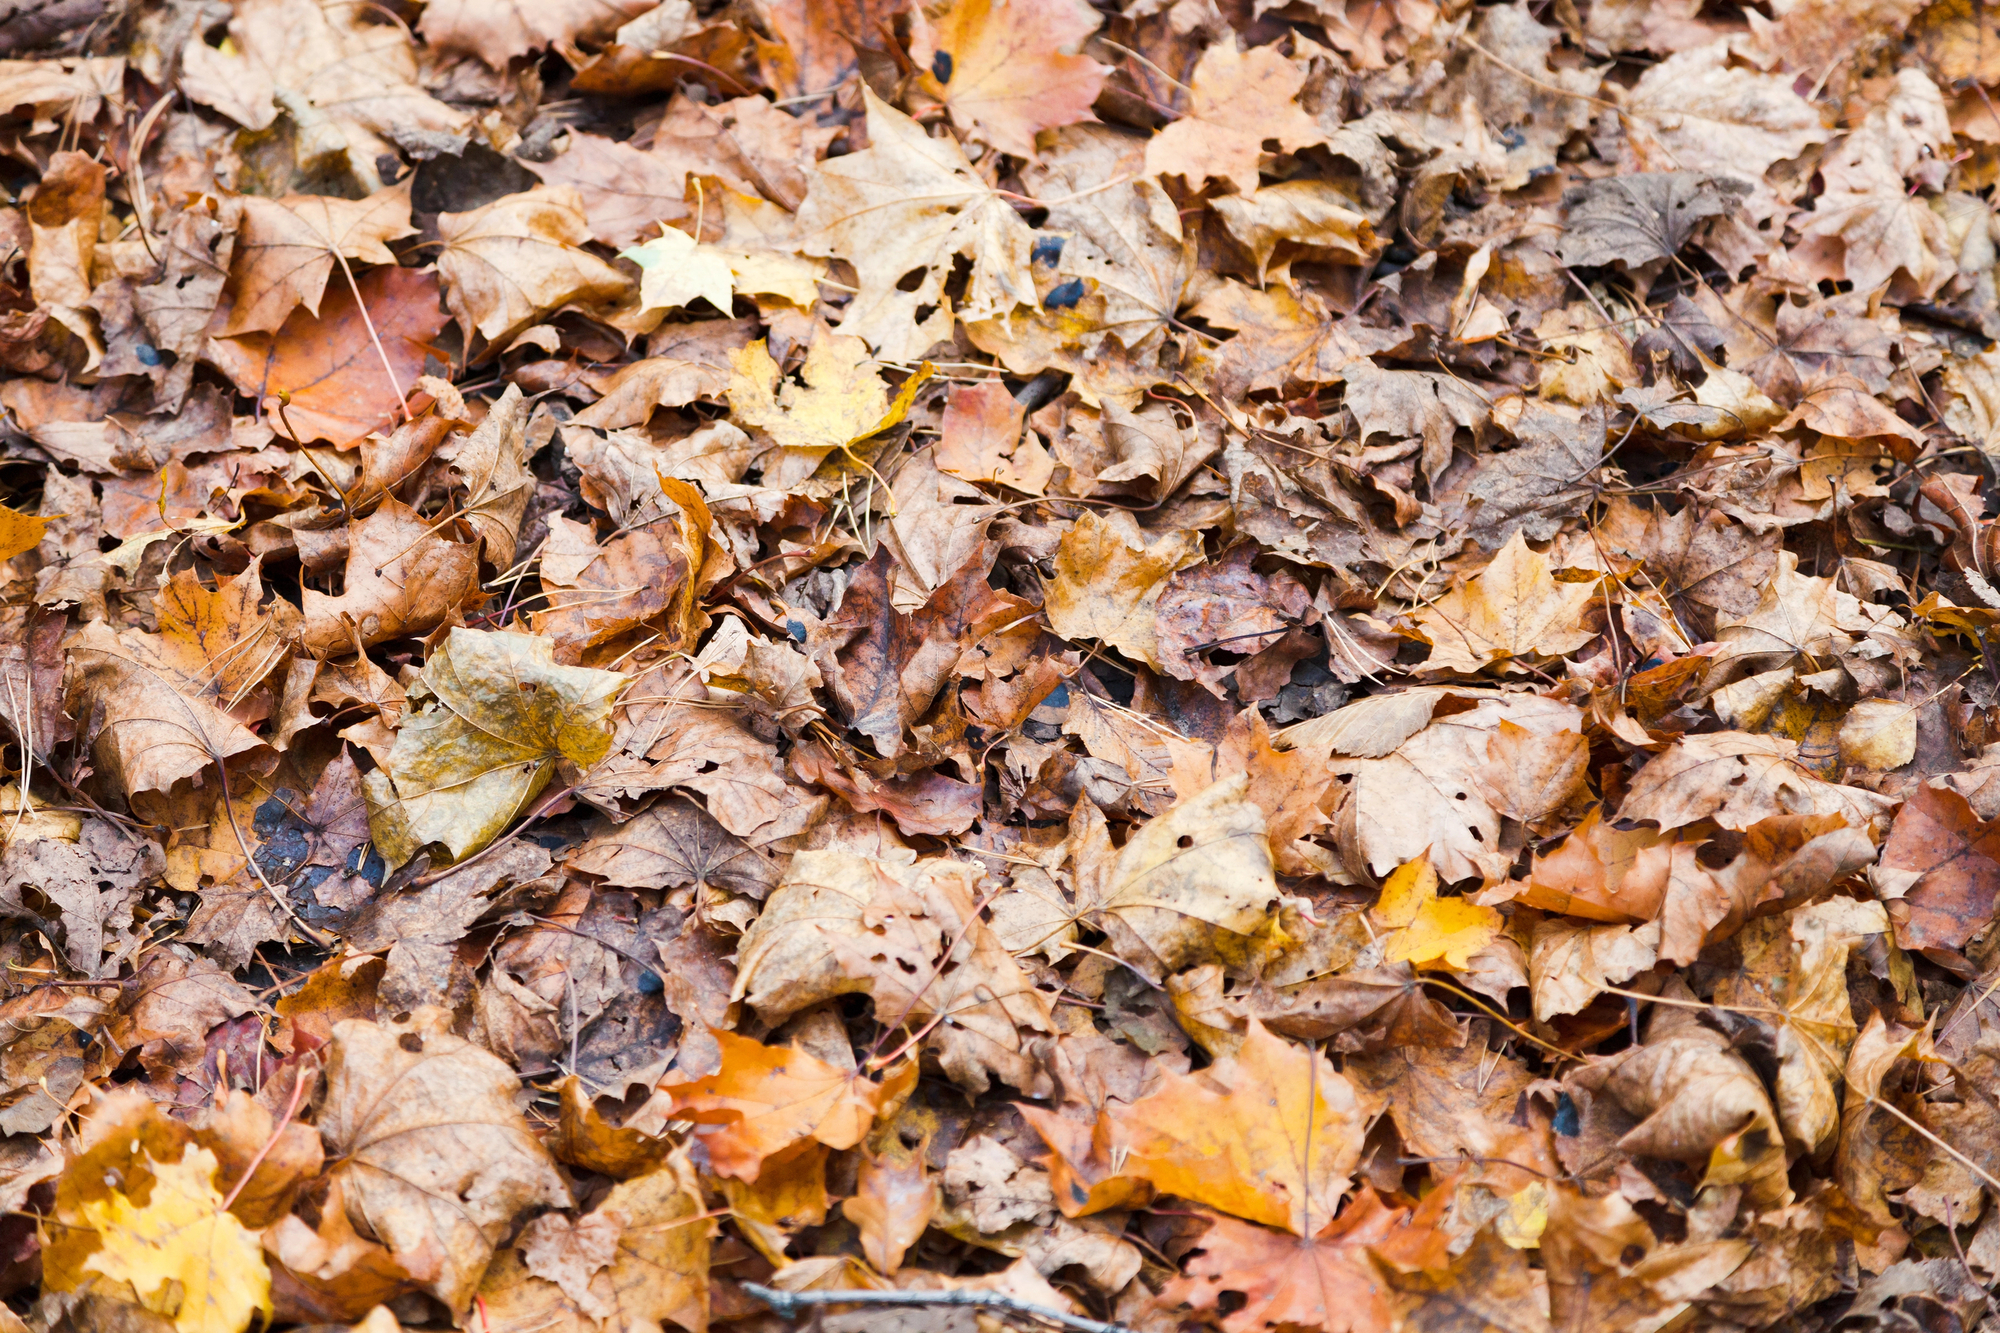 leaf litter on the ground, providing habitat for pollinators and more - photo